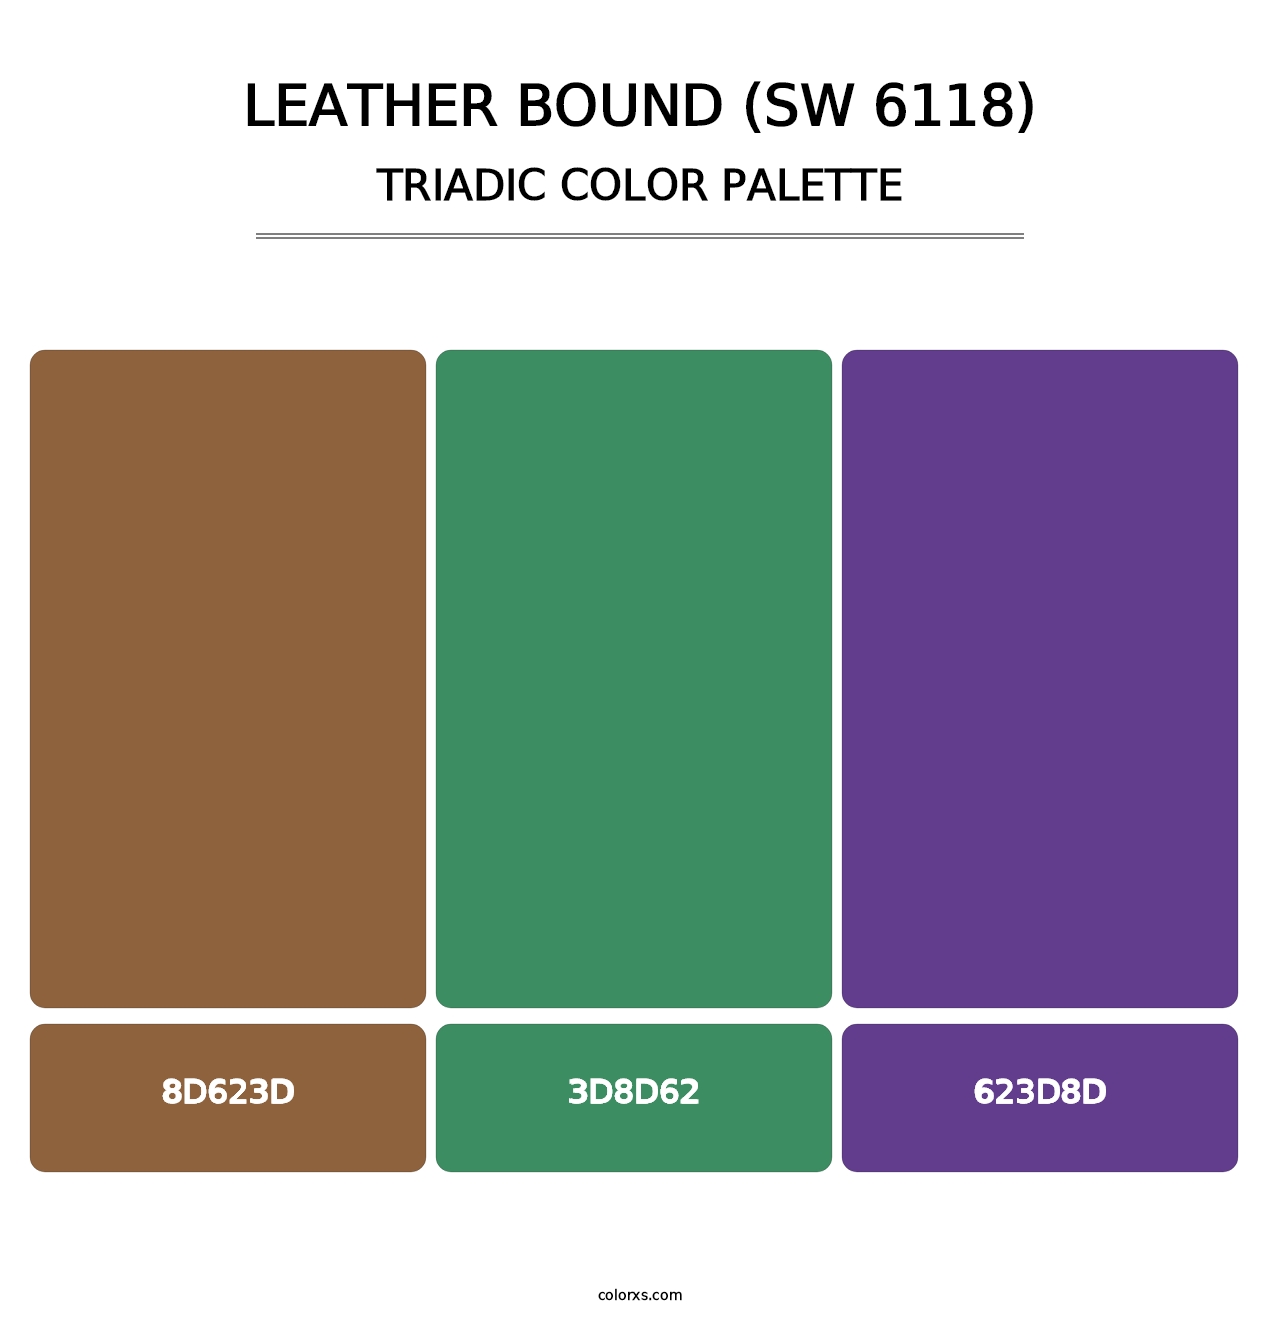 Leather Bound (SW 6118) - Triadic Color Palette